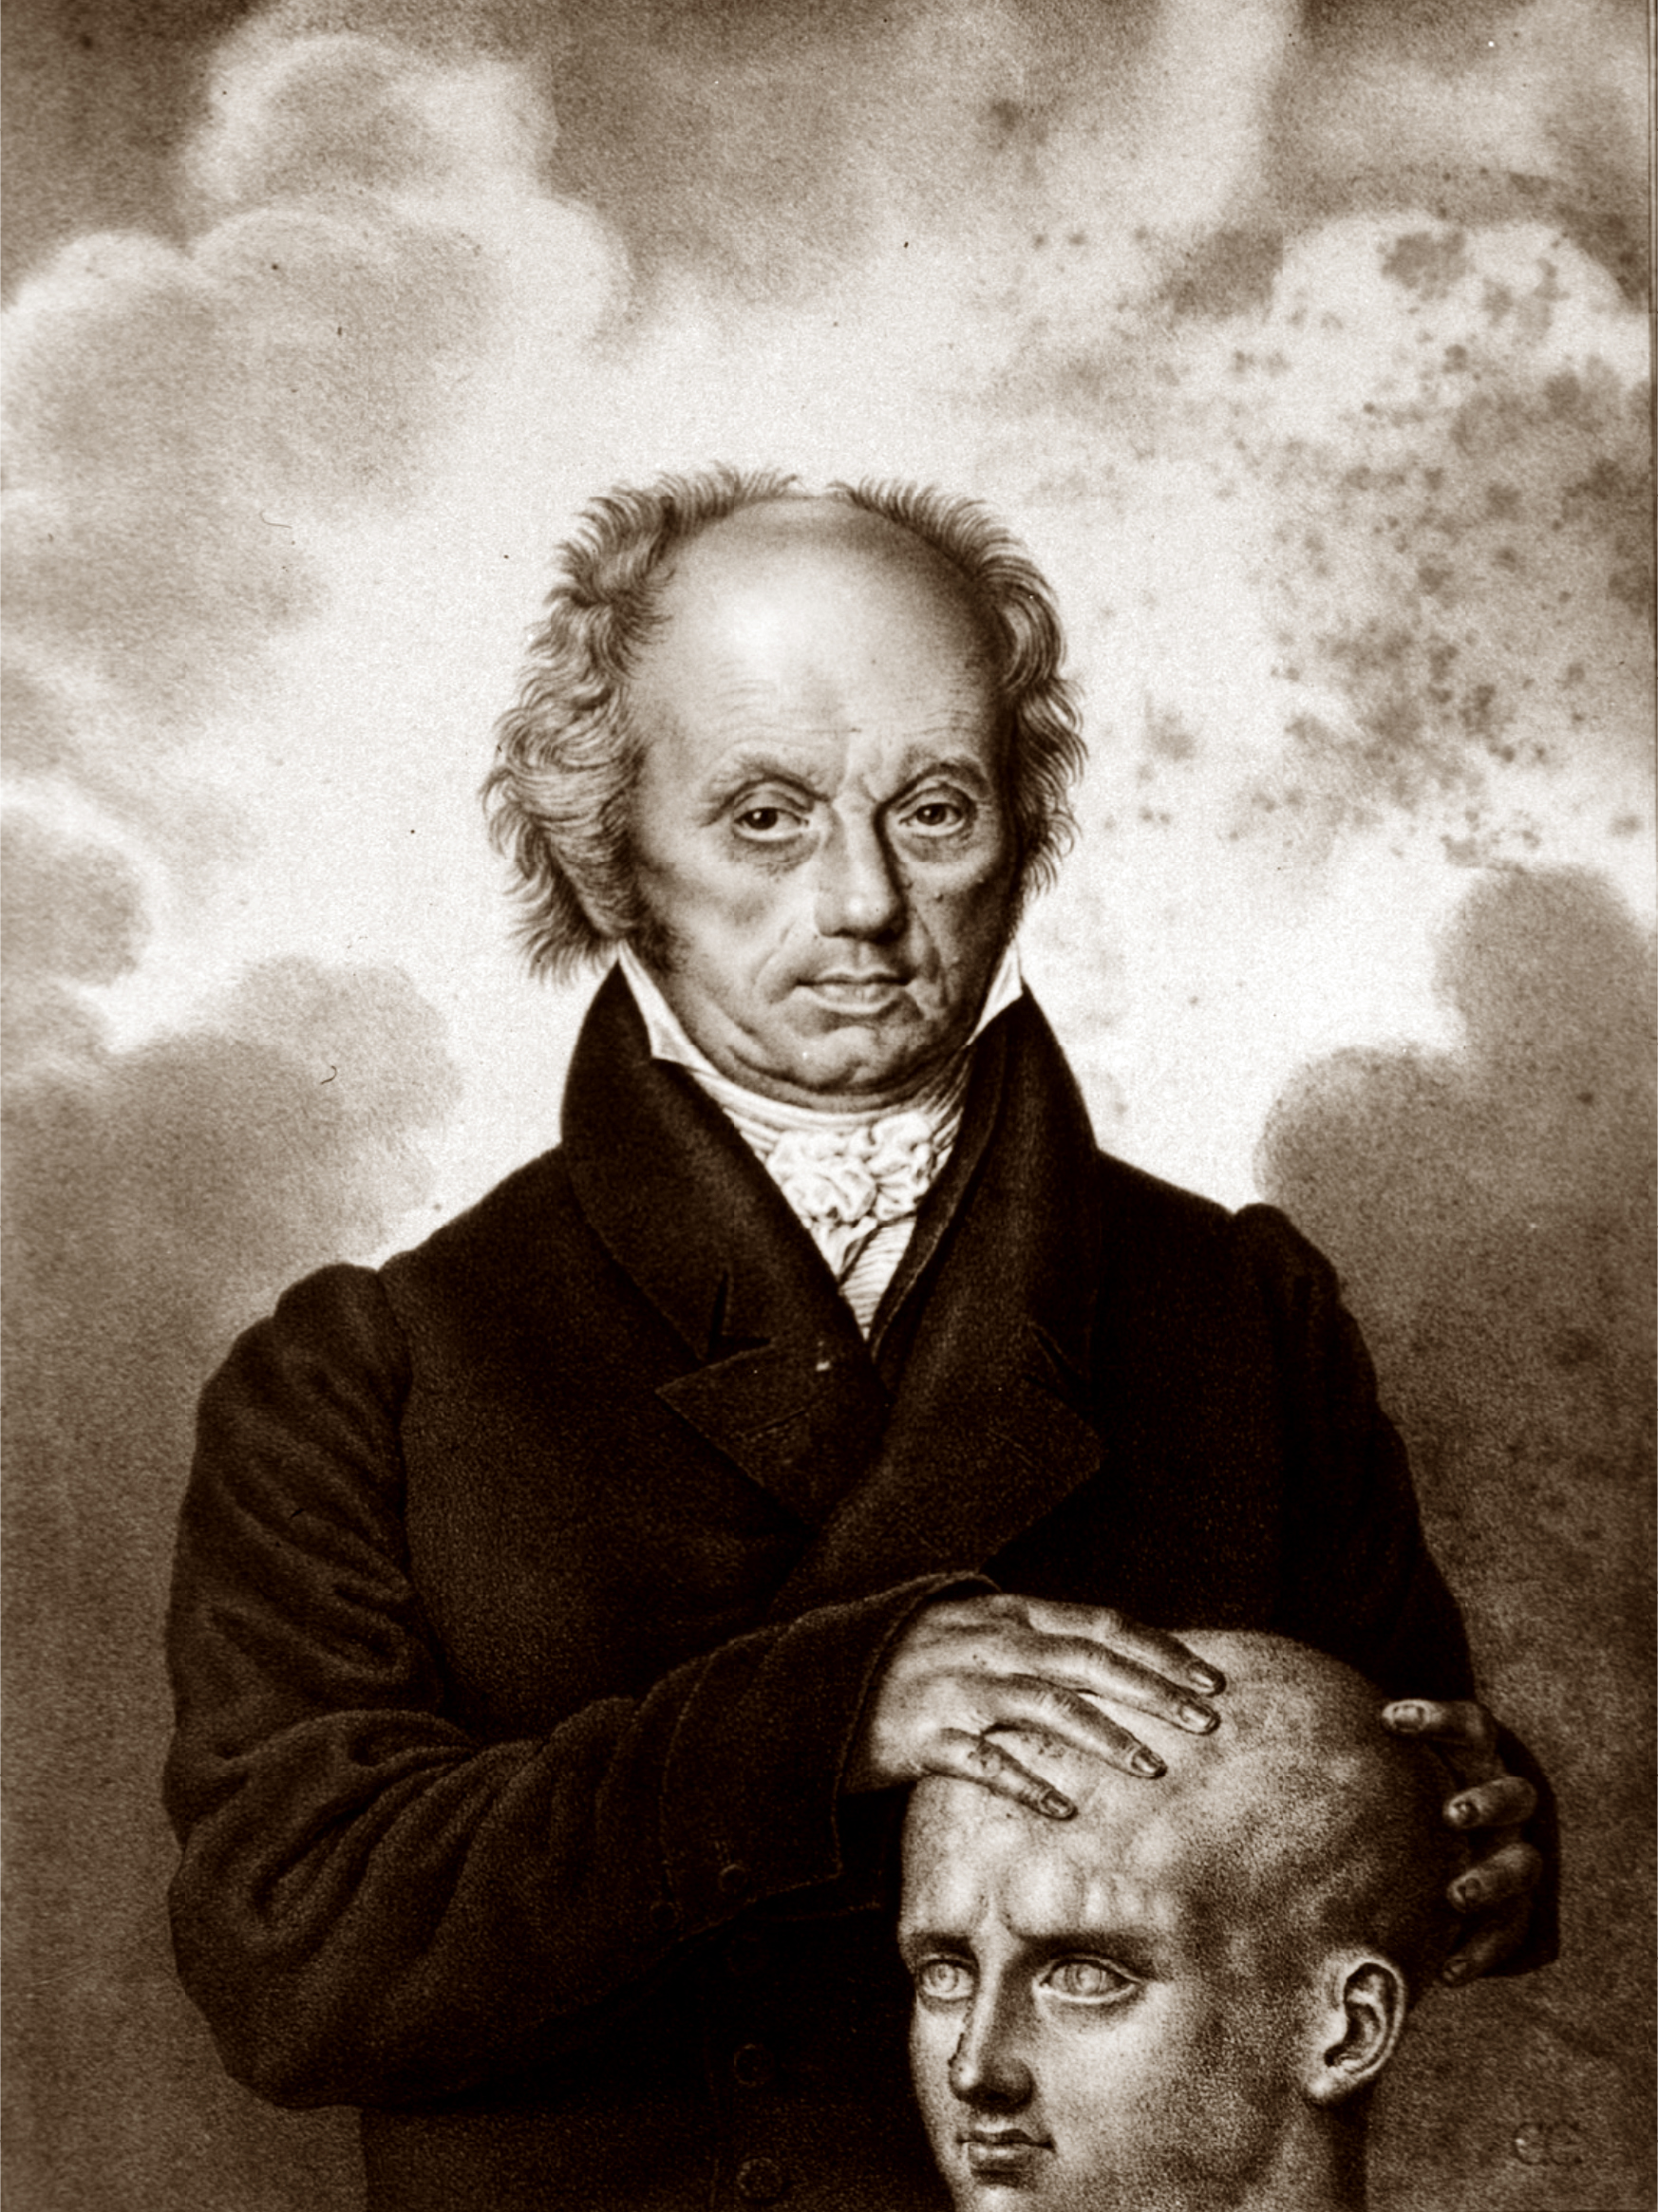 German physiologist Franz Joseph Gall in a half-length front pose, with hands on a head, illustrating phrenological techniques.